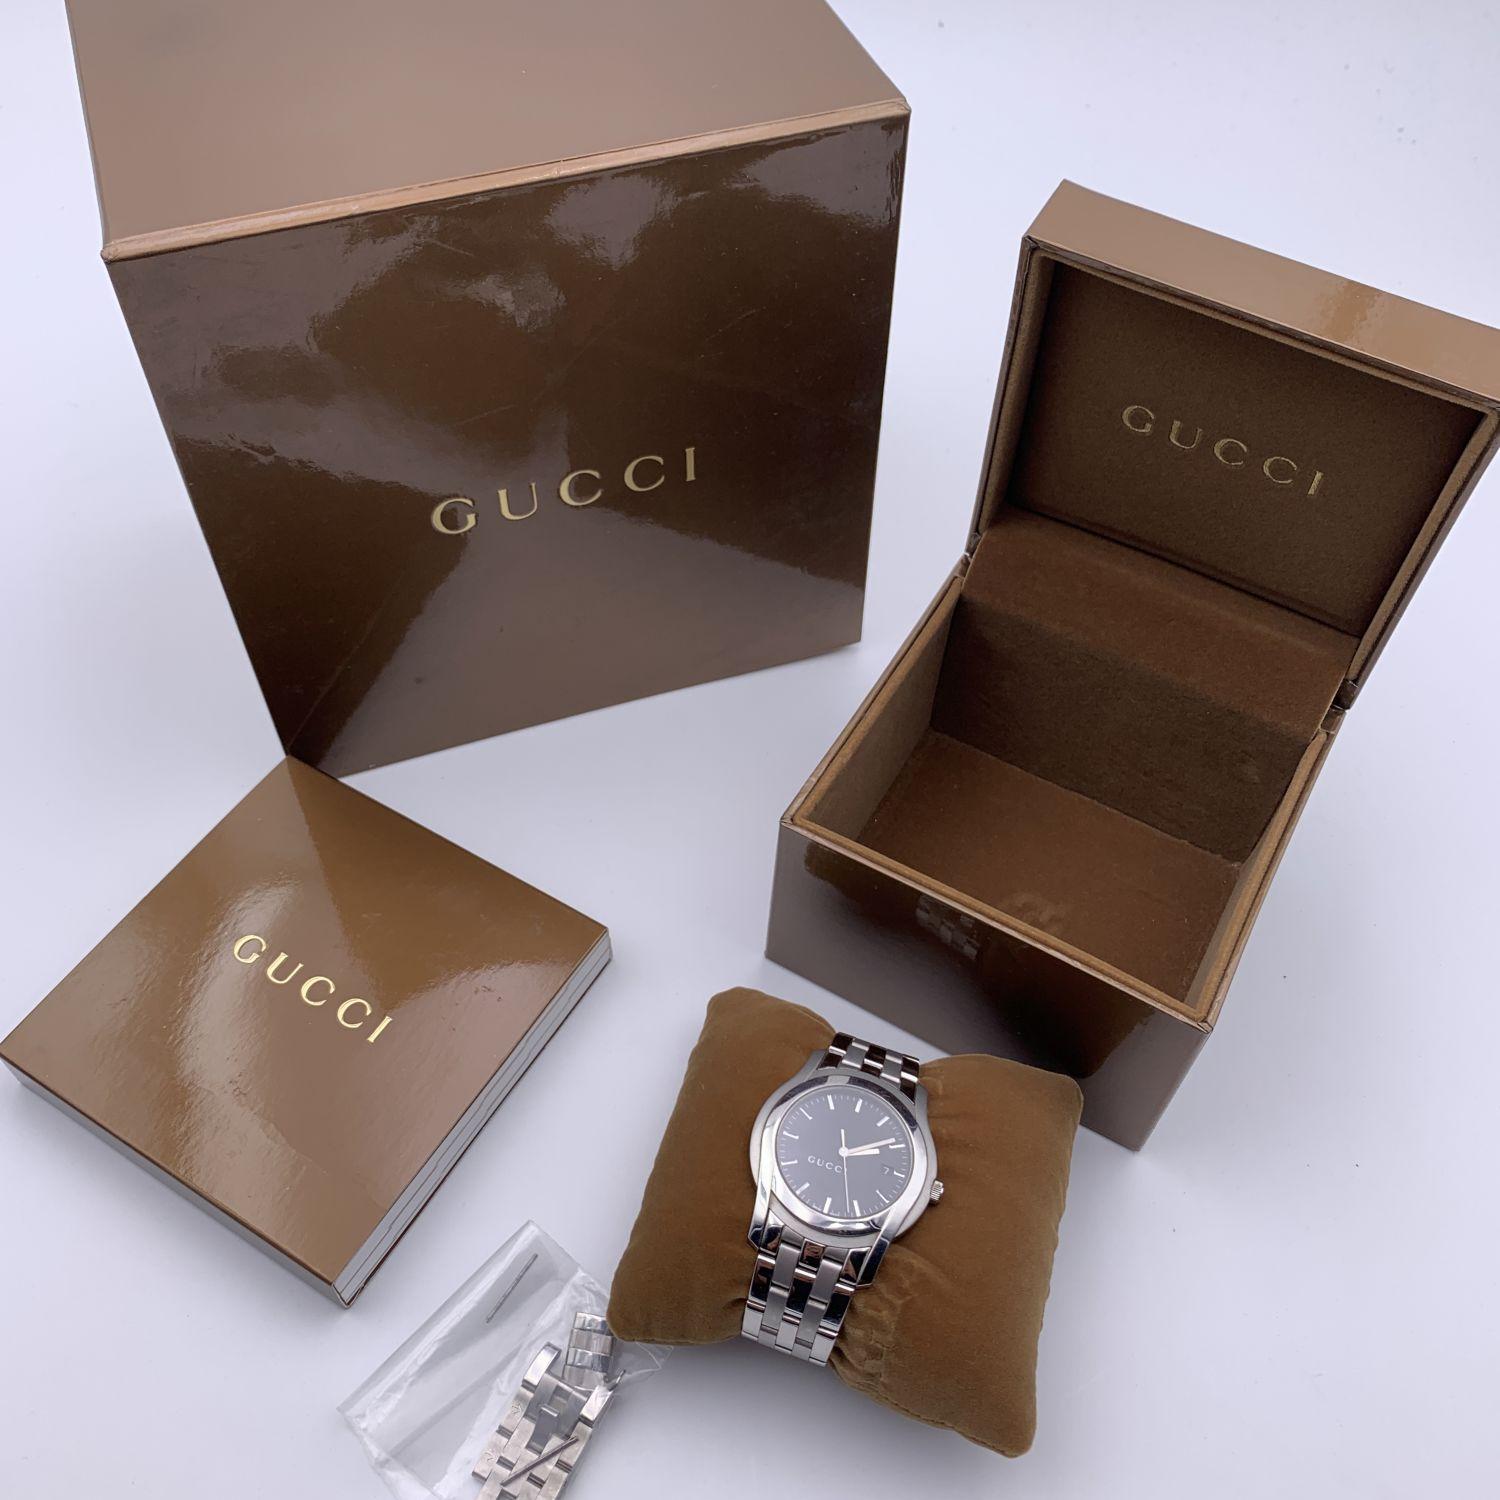 Gucci silver tone stainless steel wrist watch, mod. 5500 XL. Black Dial. Date at 3 o'clock. Sapphire crystal. Swiss Made Quartz movement. Gucci written on face. Roman numbers. Gucci crest on the reverse of the case. GUCCI logo engraved on the clasp.